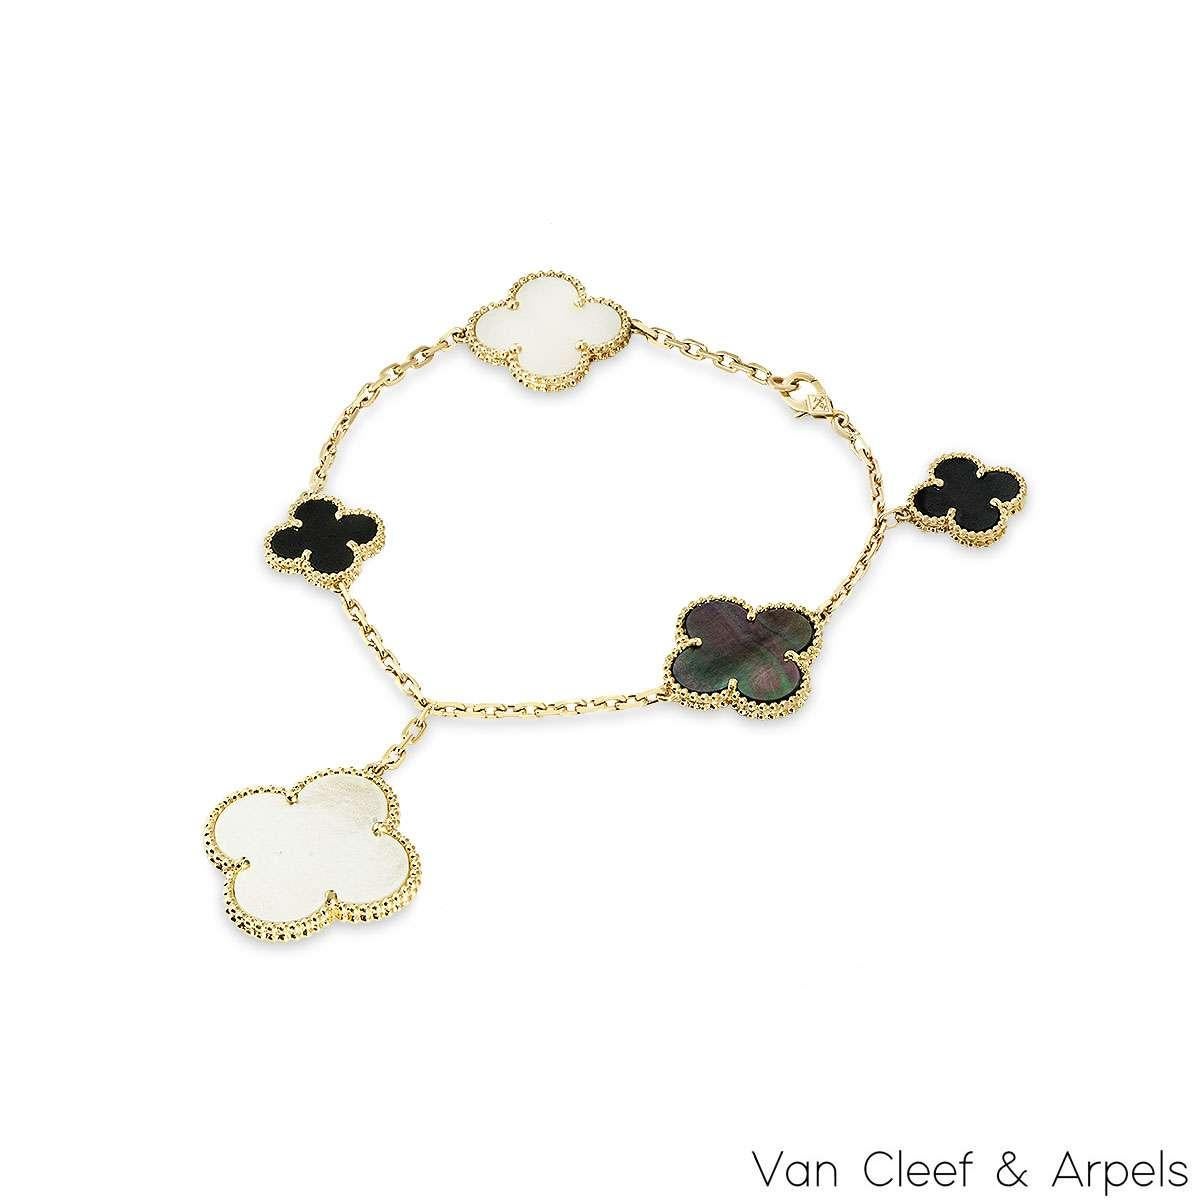 An iconic 18k yellow gold bracelet by Van Cleef & Arpels, from the Magic Alhambra collection. Comprising of 5 four-leaf clover motifs alternating in size complemented by a beaded outer edge, each individually set with onyx as well as white and grey